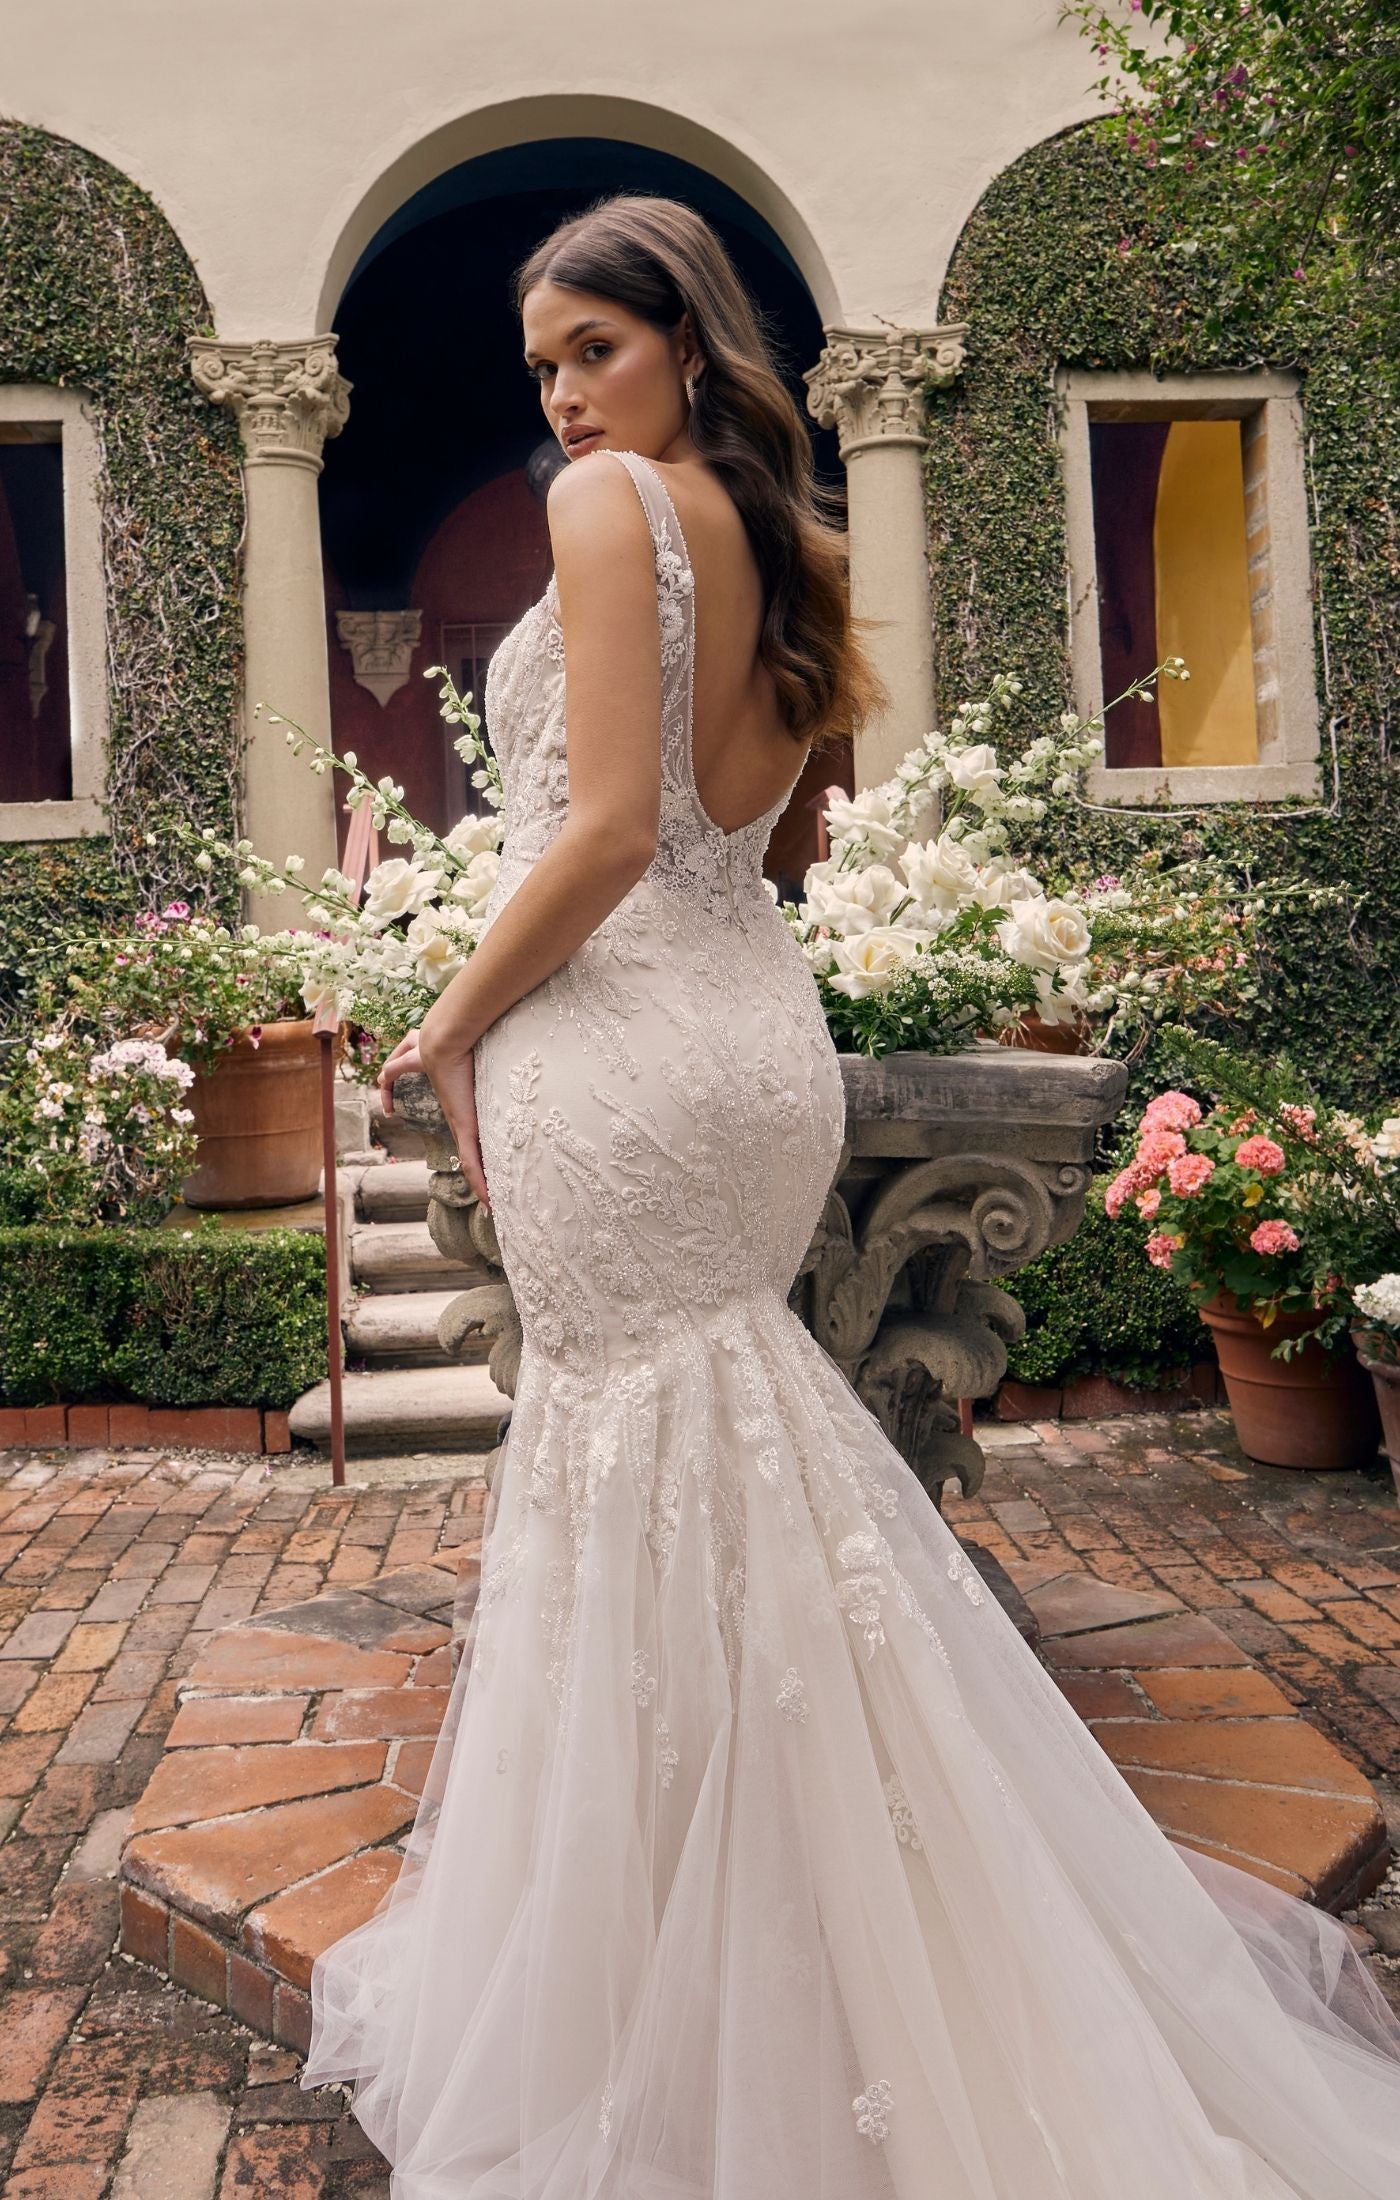 Casablanca Bridal 4546 Sylvie Mermaid Sweetheart Neckline Tulle Floral Lace Train Wedding Gown. Made for every type of body shape, this glittering fit and flare wedding dress is going to hug your curves in the most flattering way. The unique sweetheart and V-neckline gives way to thin straps and a sexy low back. Tonal beaded and sequined lace appliqués run through the entirety of the gown that will glisten into the night. It's complete with a stretch georgette lining and a sheer back.